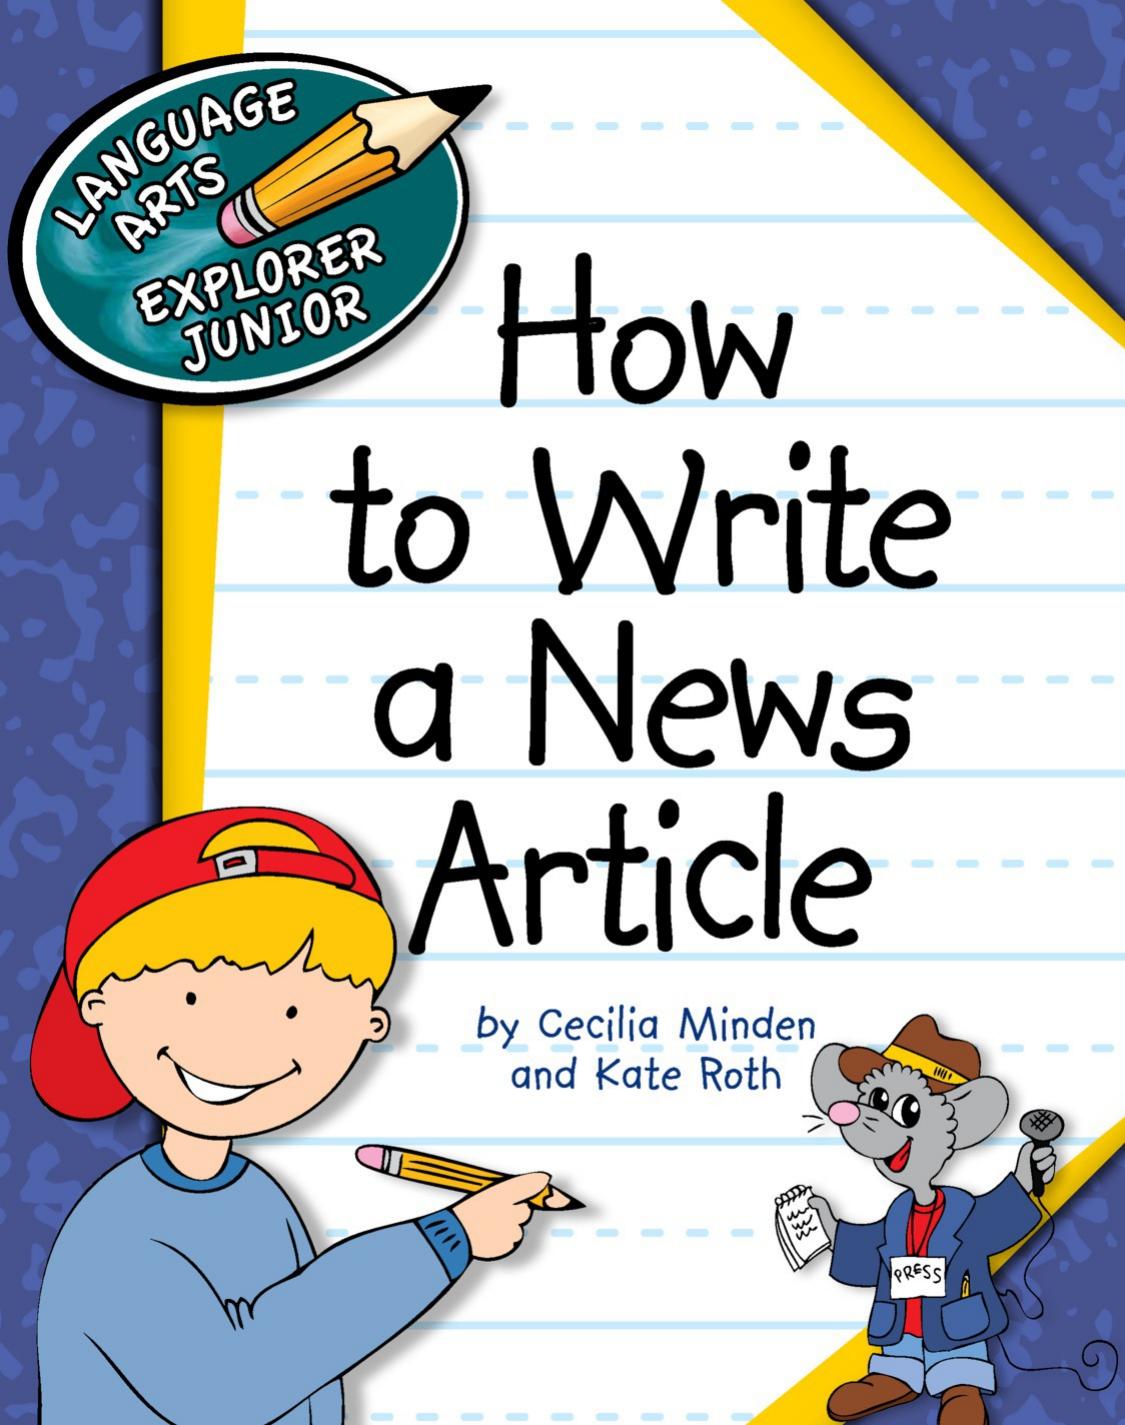 How to Write a News Article